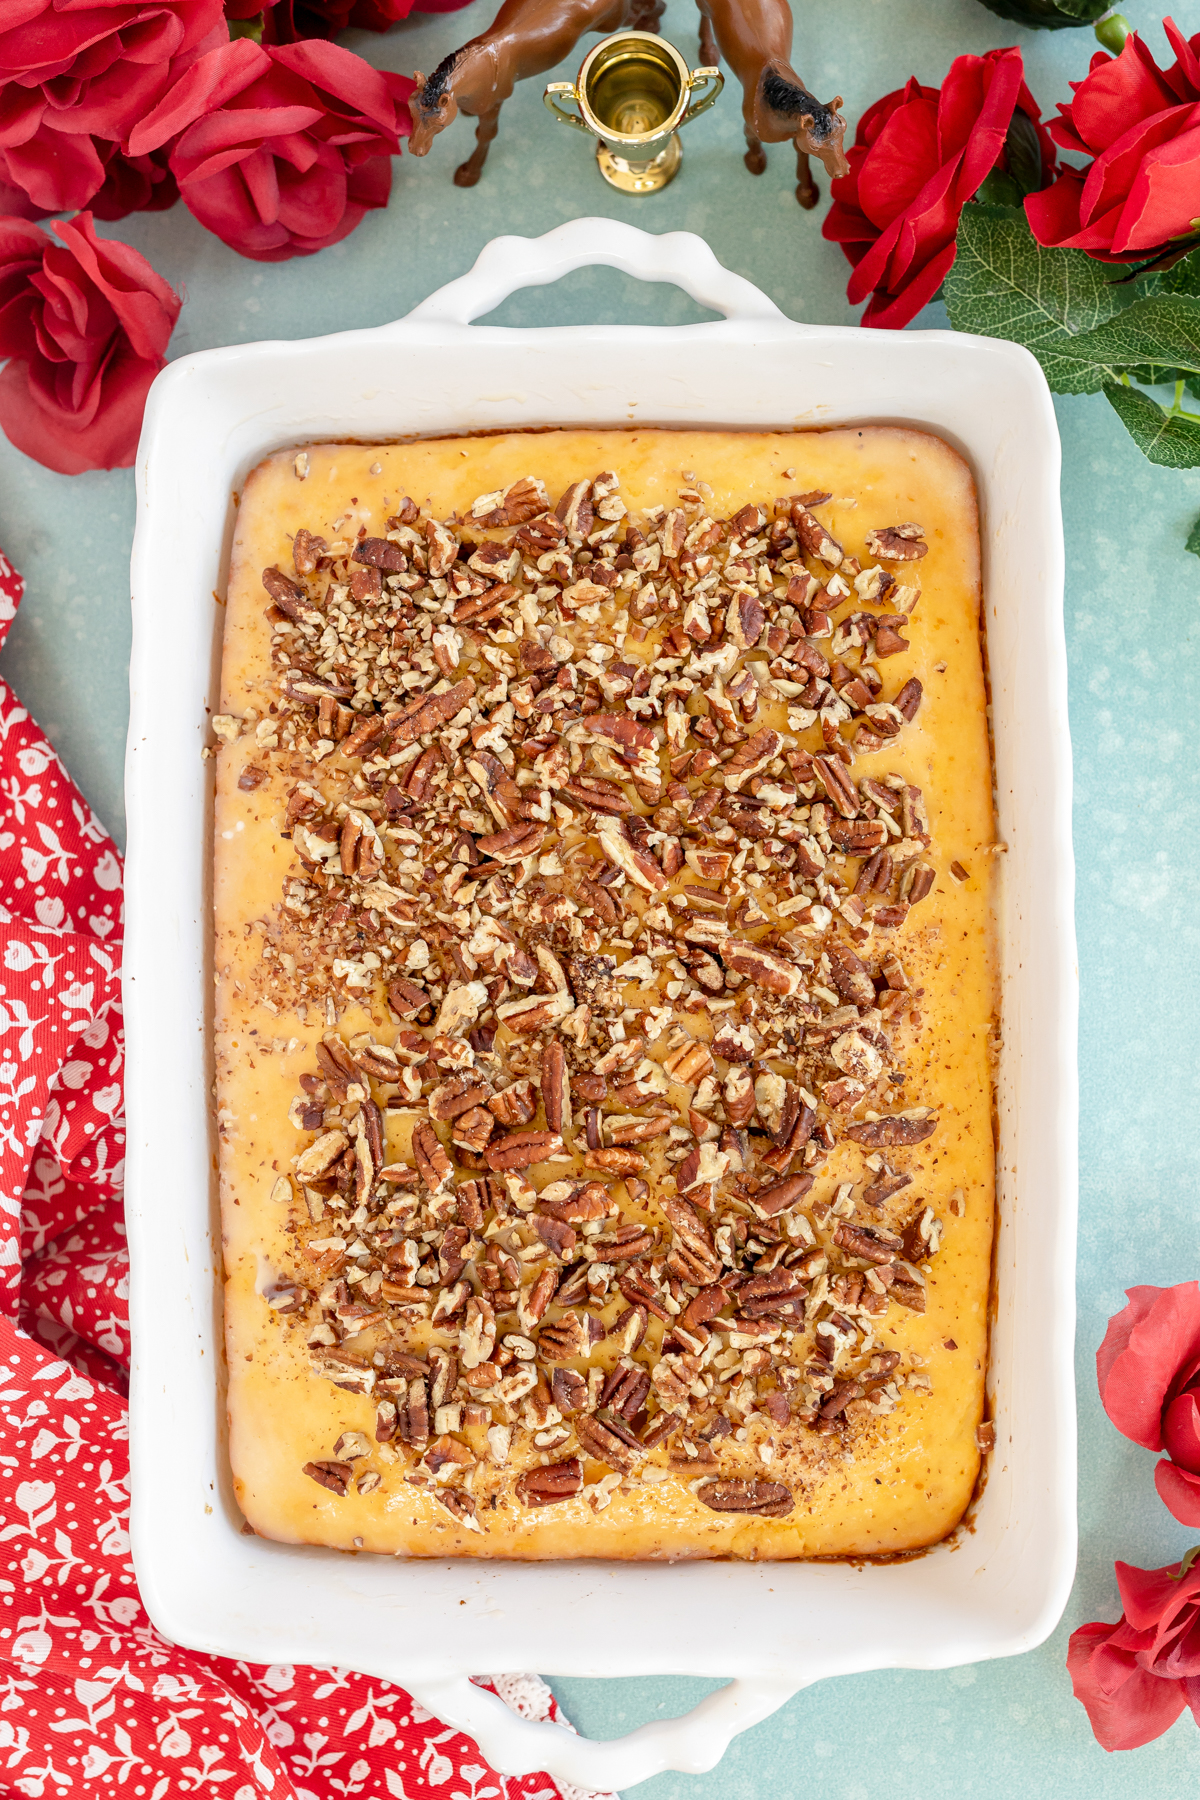 Kentucky butter cake topped with chopped pecans